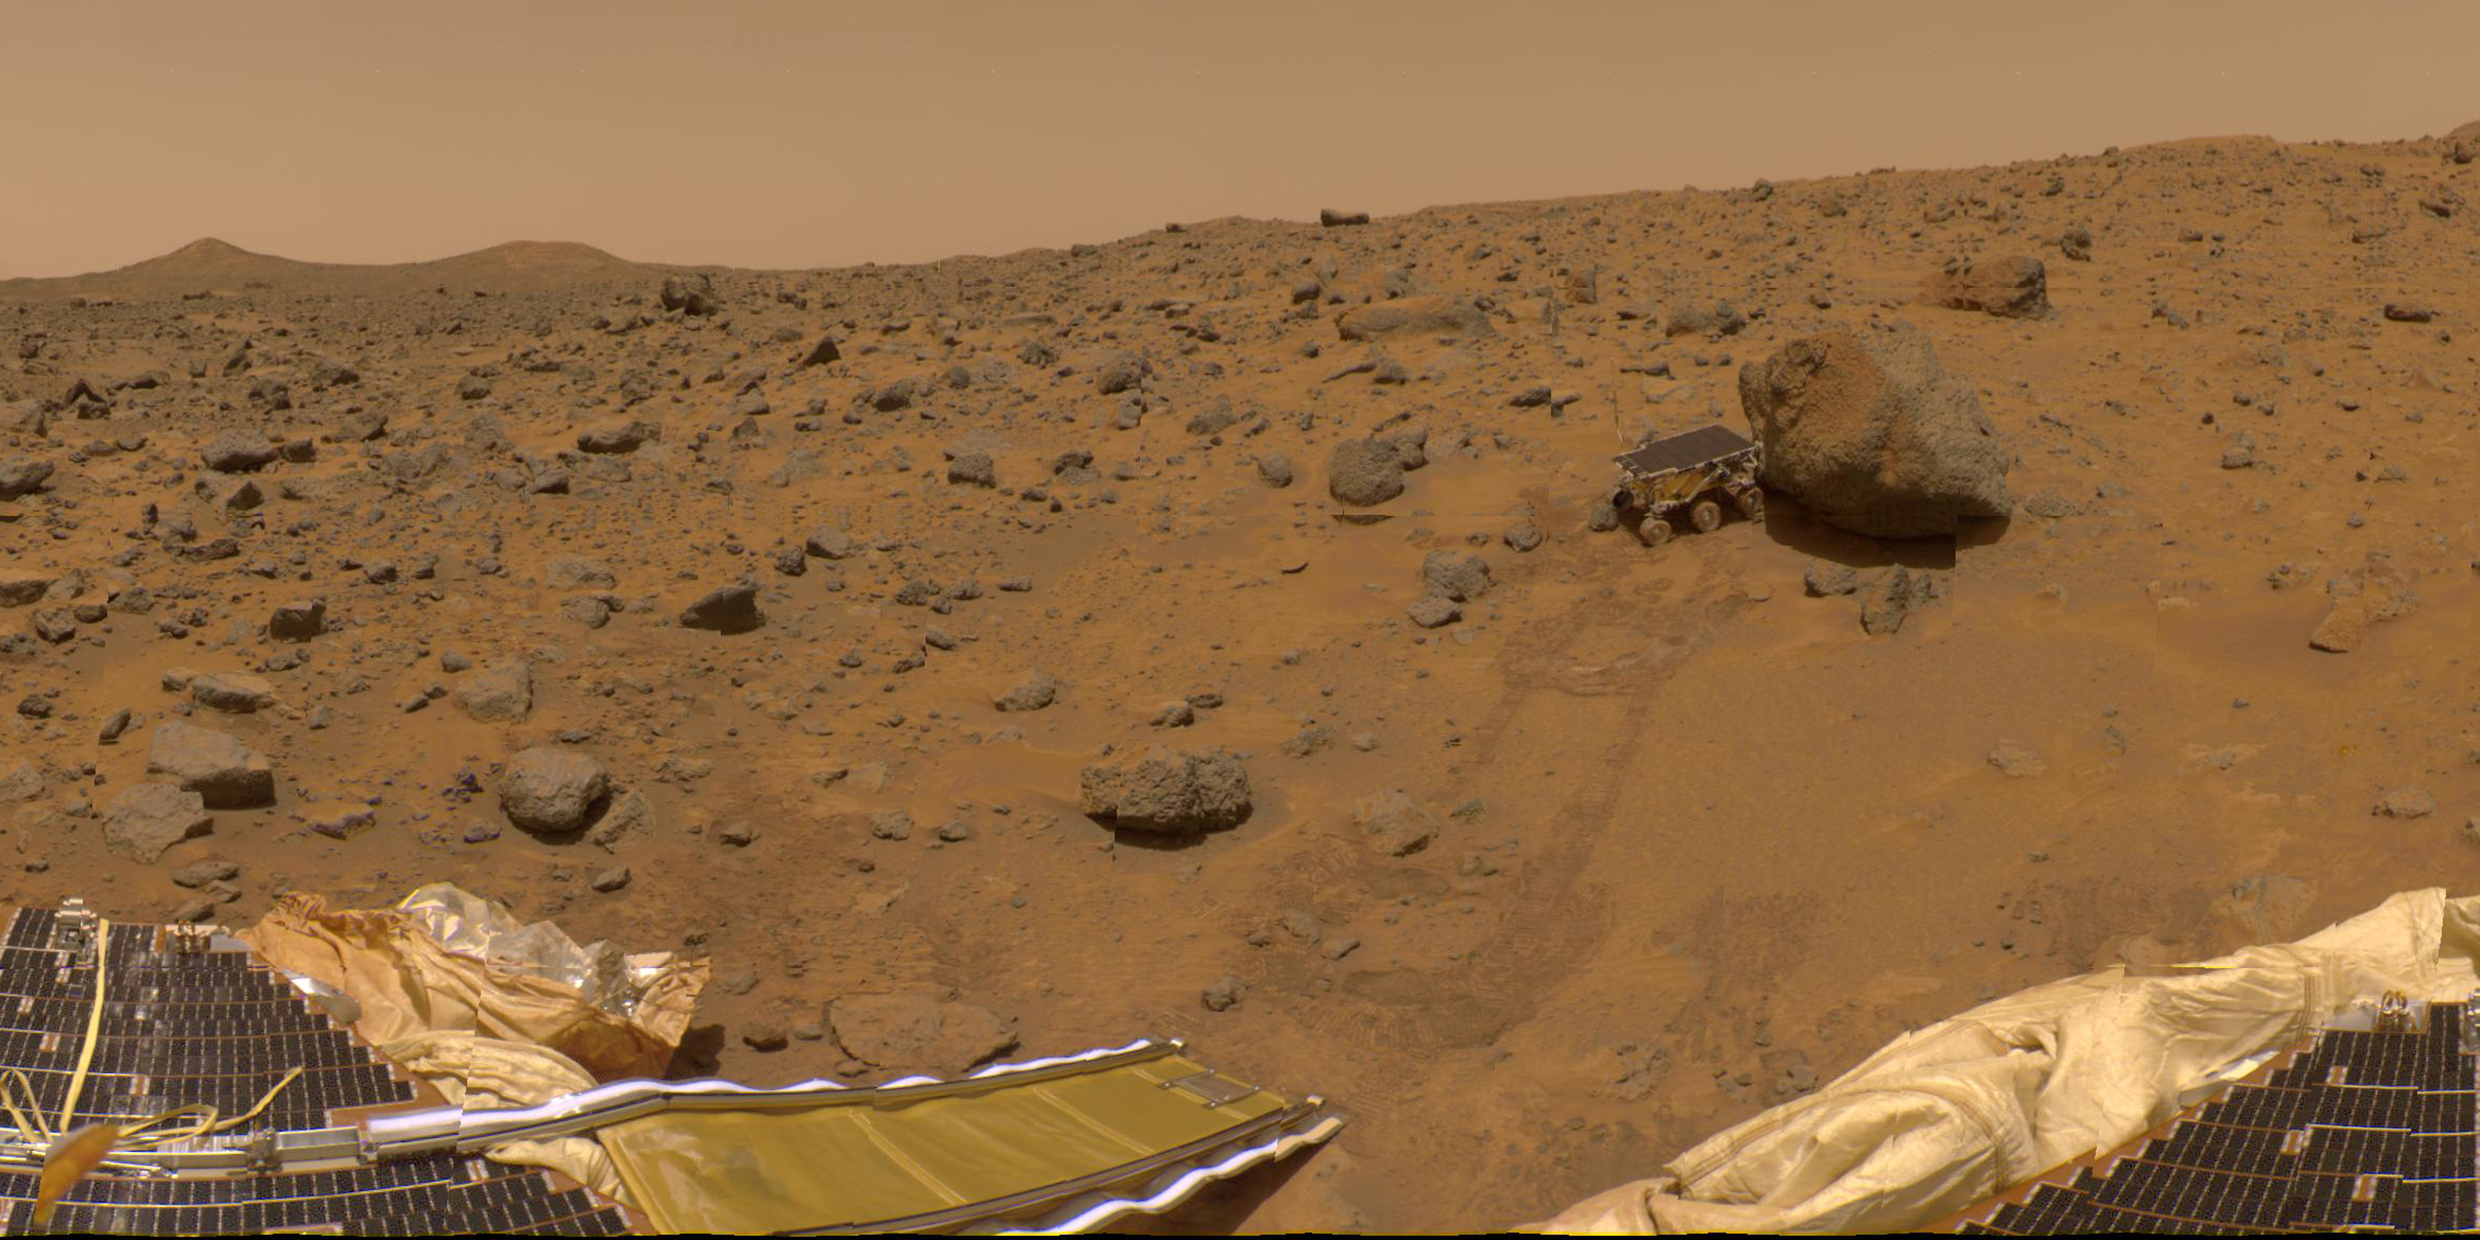 Image of the Sojourner rover on the surface of Mars